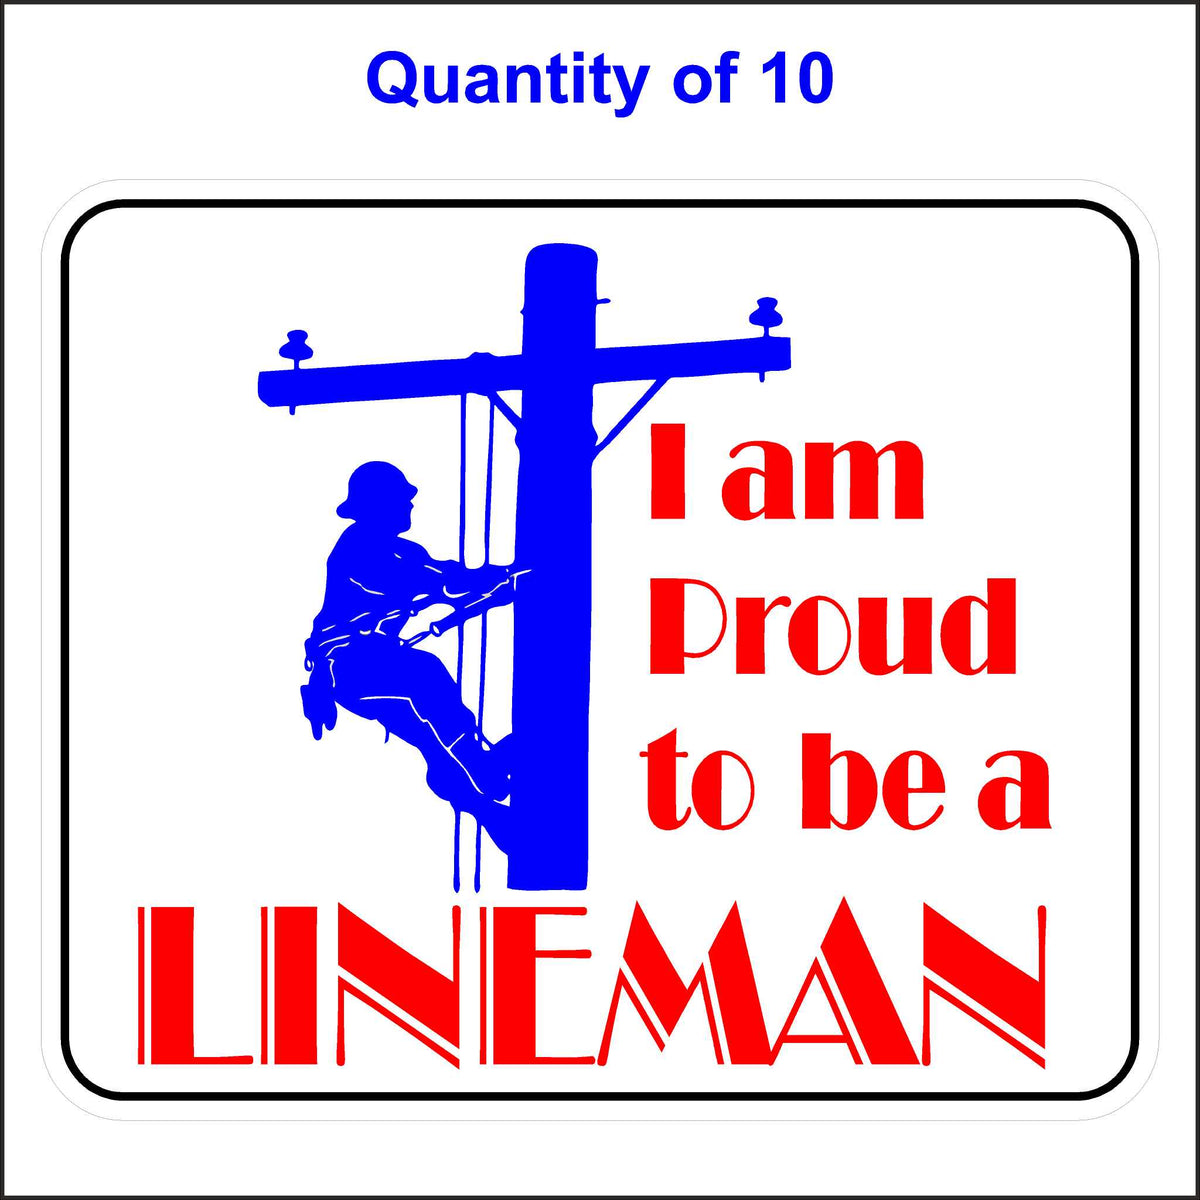 I Am Proud to Be a Lineman Sticker. 10 Quantity.